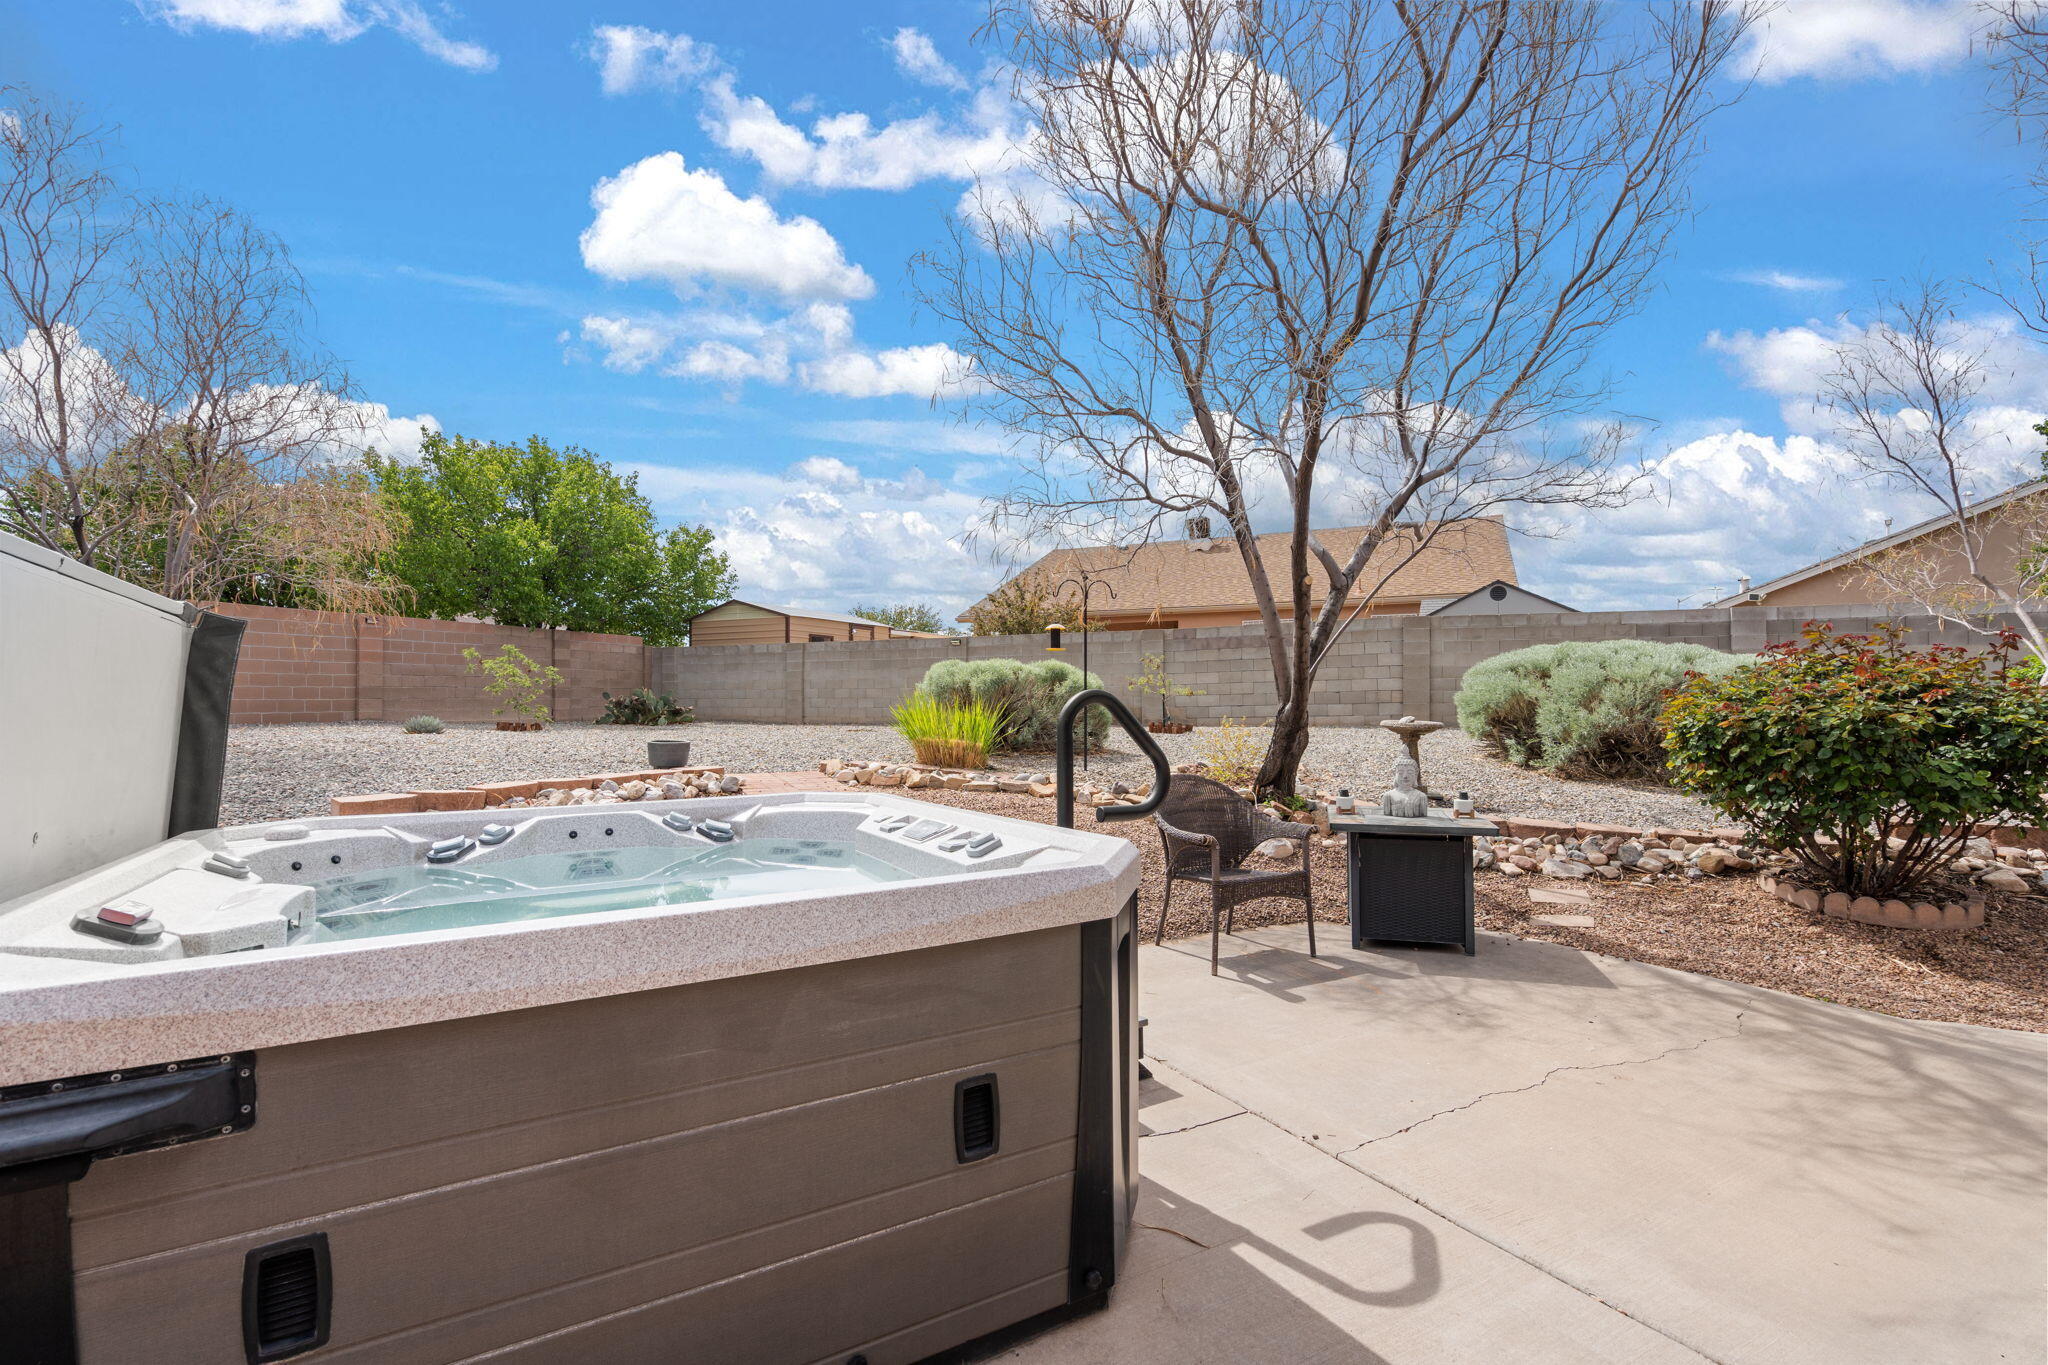 11224 Deer Lodge Place SE, Albuquerque, New Mexico 87123, 3 Bedrooms Bedrooms, ,2 BathroomsBathrooms,Residential,For Sale,11224 Deer Lodge Place SE,1061393